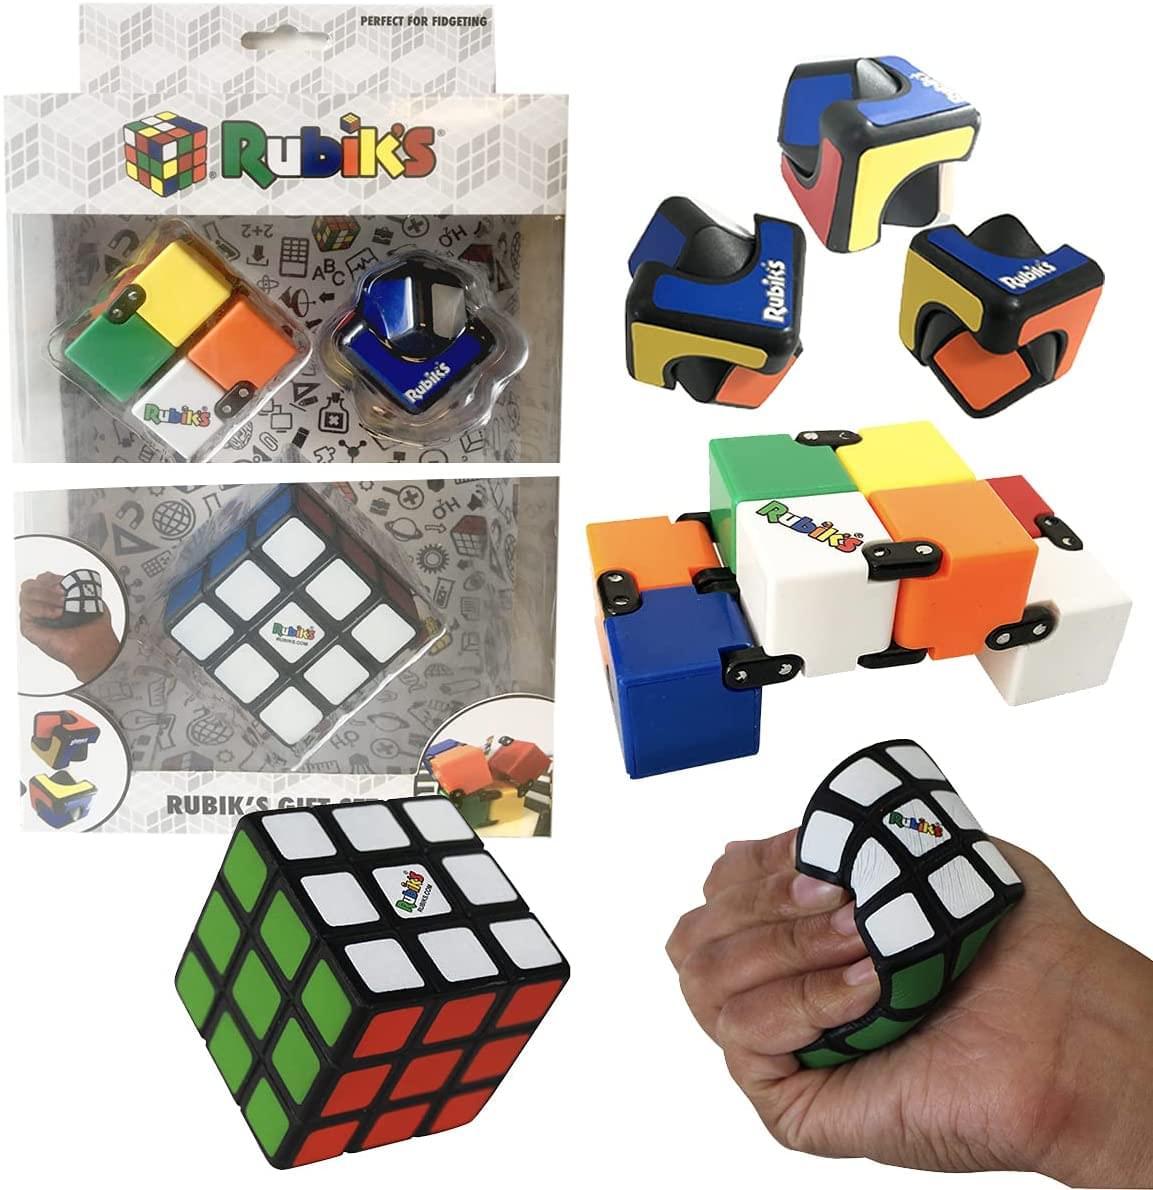 Rubiks 3 Piece Gift Set, Squish Cube, Spin Cubelet, Infinity Cube